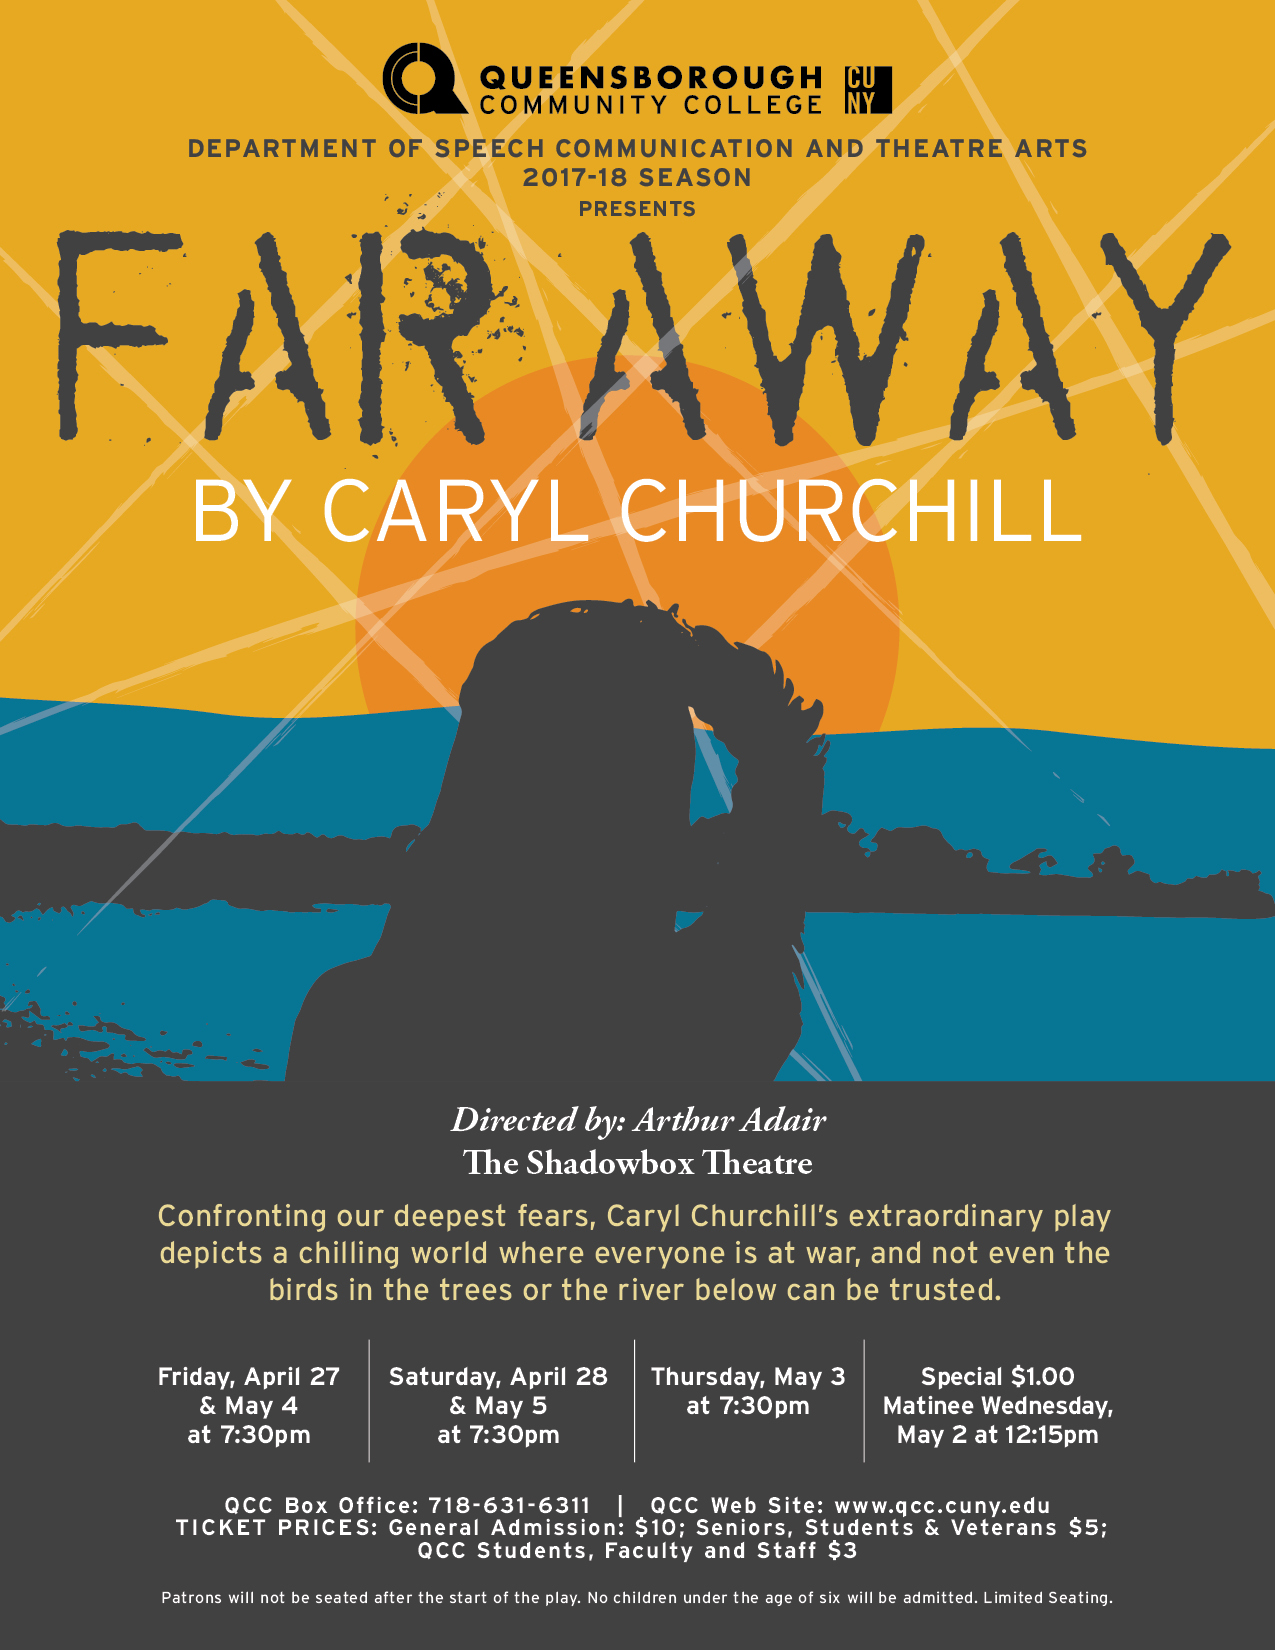 This is a poster for the spring 2018 production of ‘Far Away’, written by Caryl Churchill and directed by Professor Adair. The poster displays a young girl standing in front of a body of water and the sun.